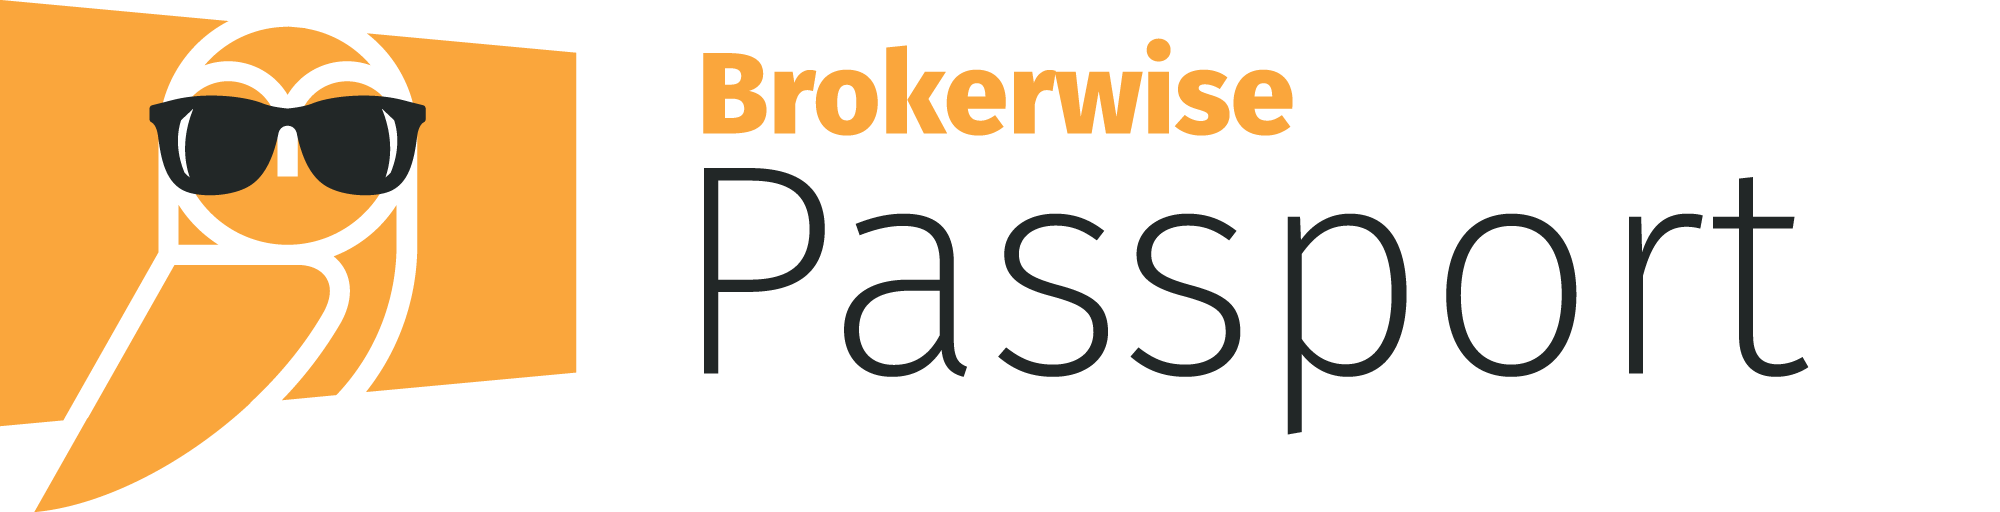 Brokerwise-Passport-logo-colour.png